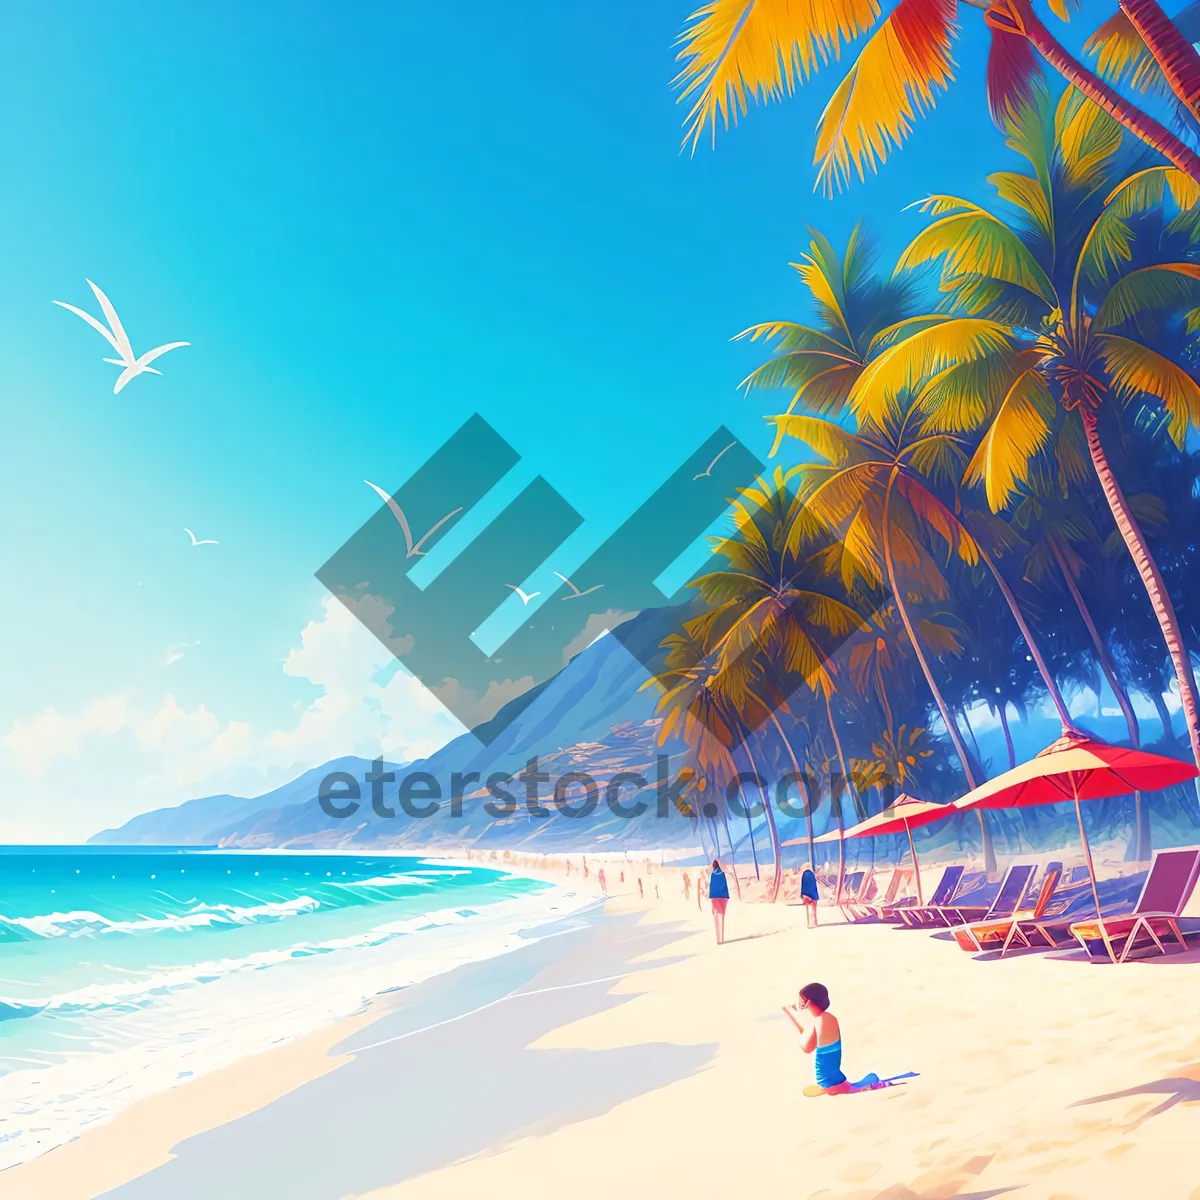 Picture of Tropical Sunset Paradise: A Vibrant Beachscape with Palm Trees and Crystal Blue Waters